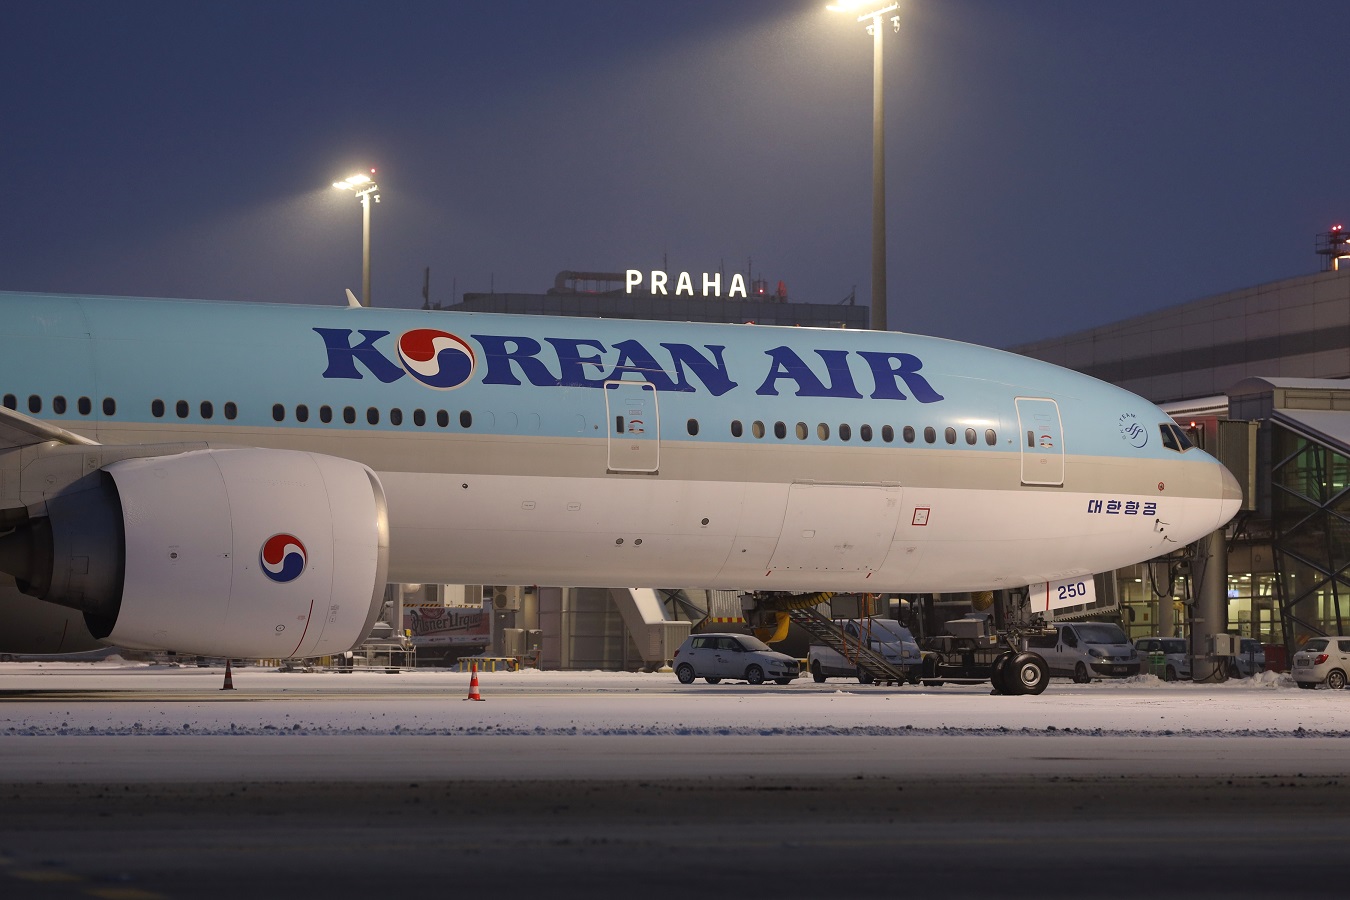 Korean Air will again offer connections from Prague to Seoul